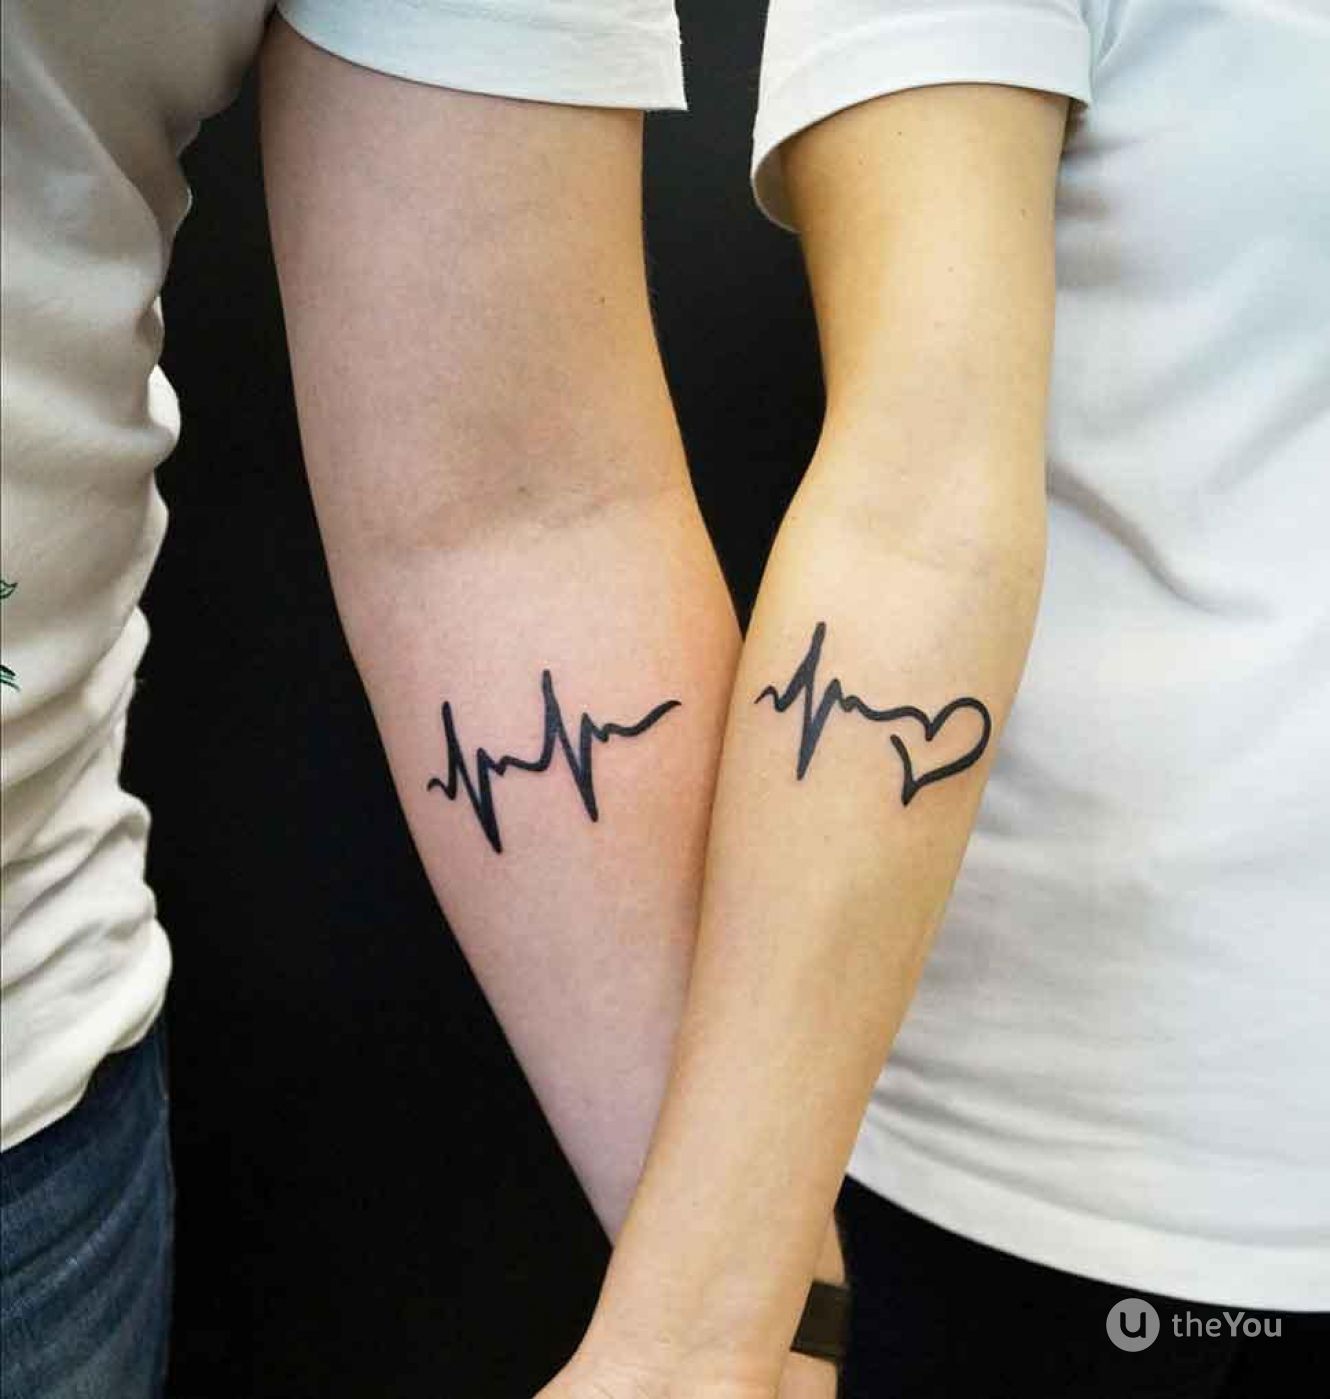 Express Your Joᴜrney with Heartbeat Tattoos